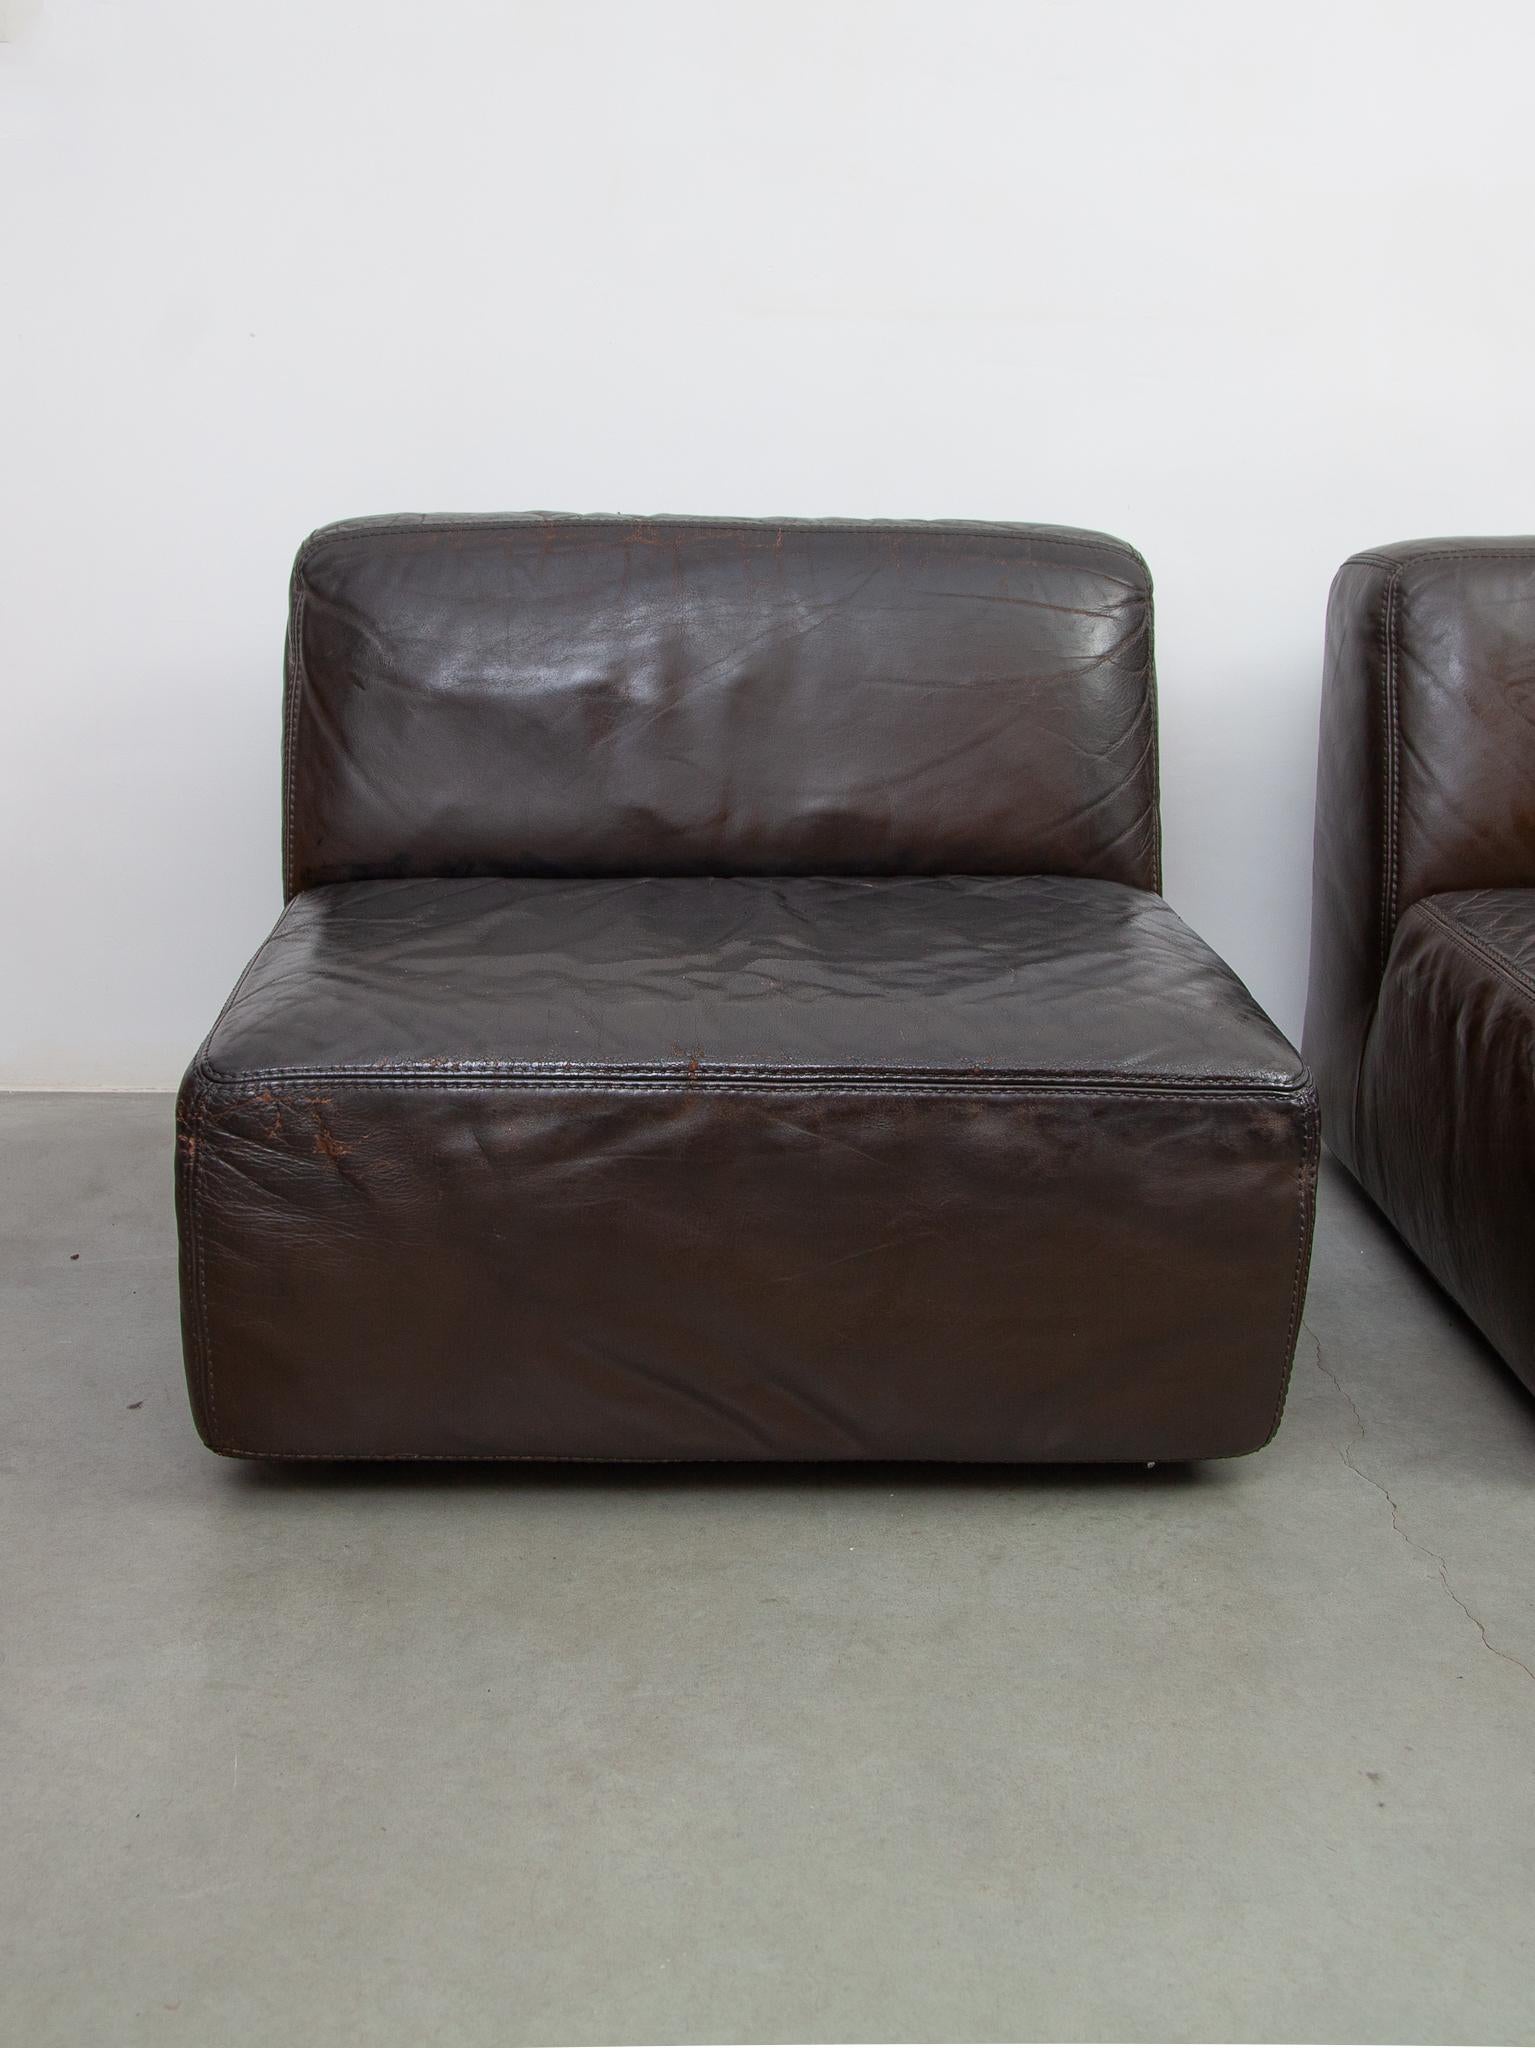 Hand-Crafted Modular Sofa 1970s Brown Leather designed by Durlet For Sale